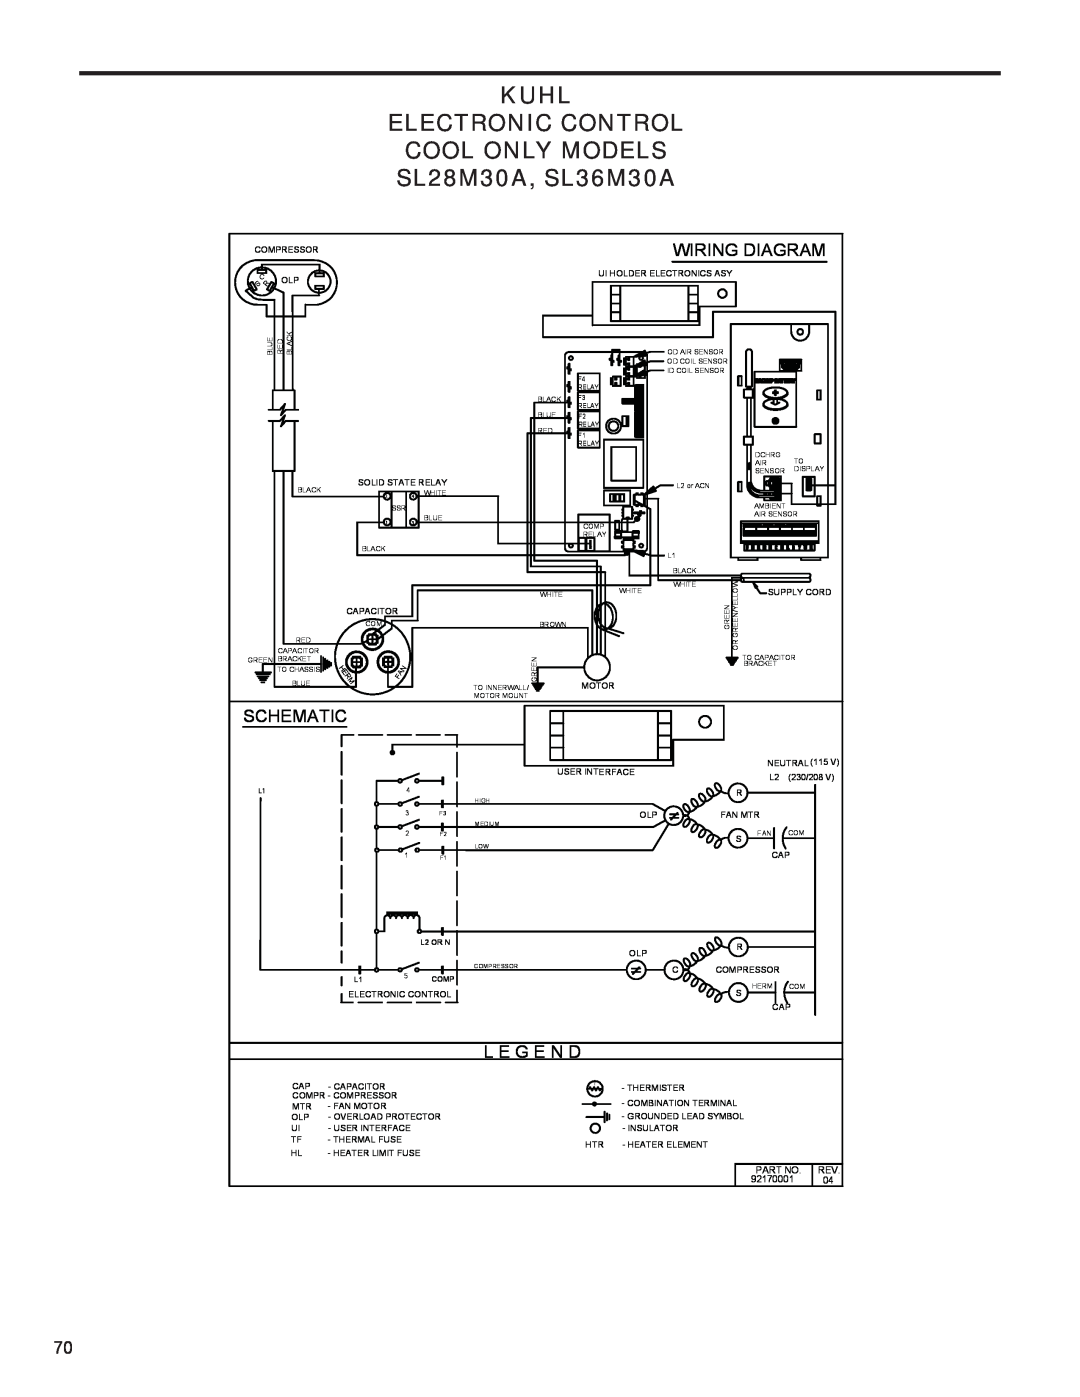 Friedrich R-410A SL28M30A, SL36M30A, Kuhl Electronic Control Cool Only Models, Wiring Diagram, Schematic, L E G E N D 